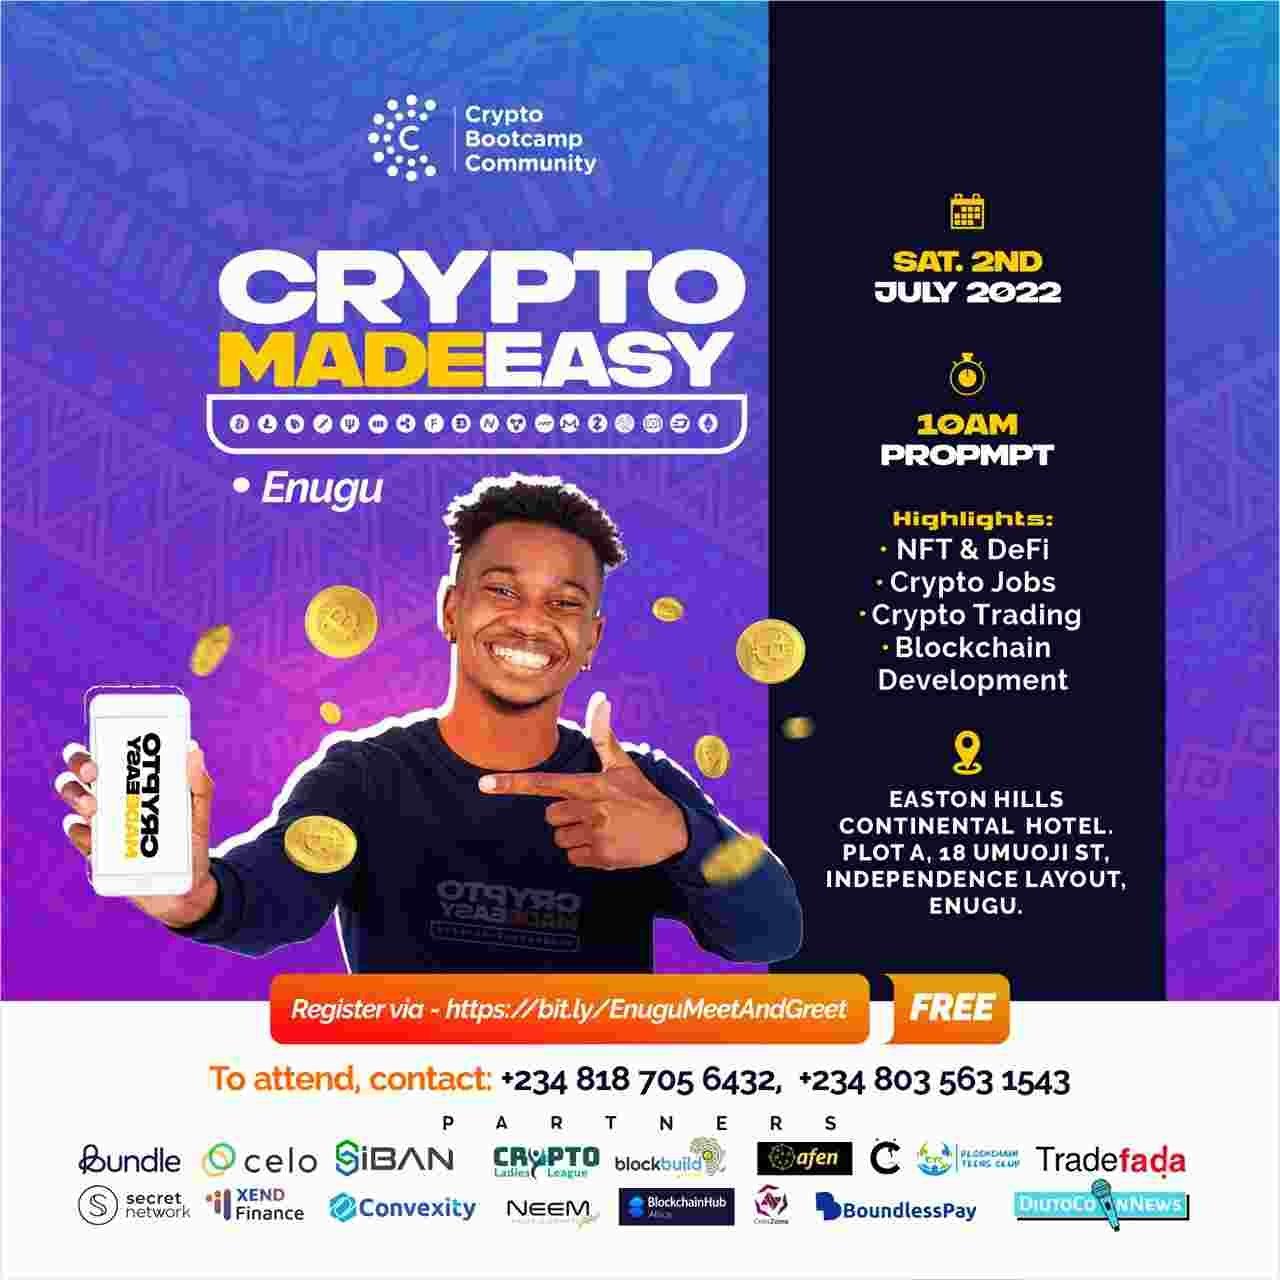 Mid-level Awareness and Crypto Education Event “Crypto Made Easy” to Debut in Enugu